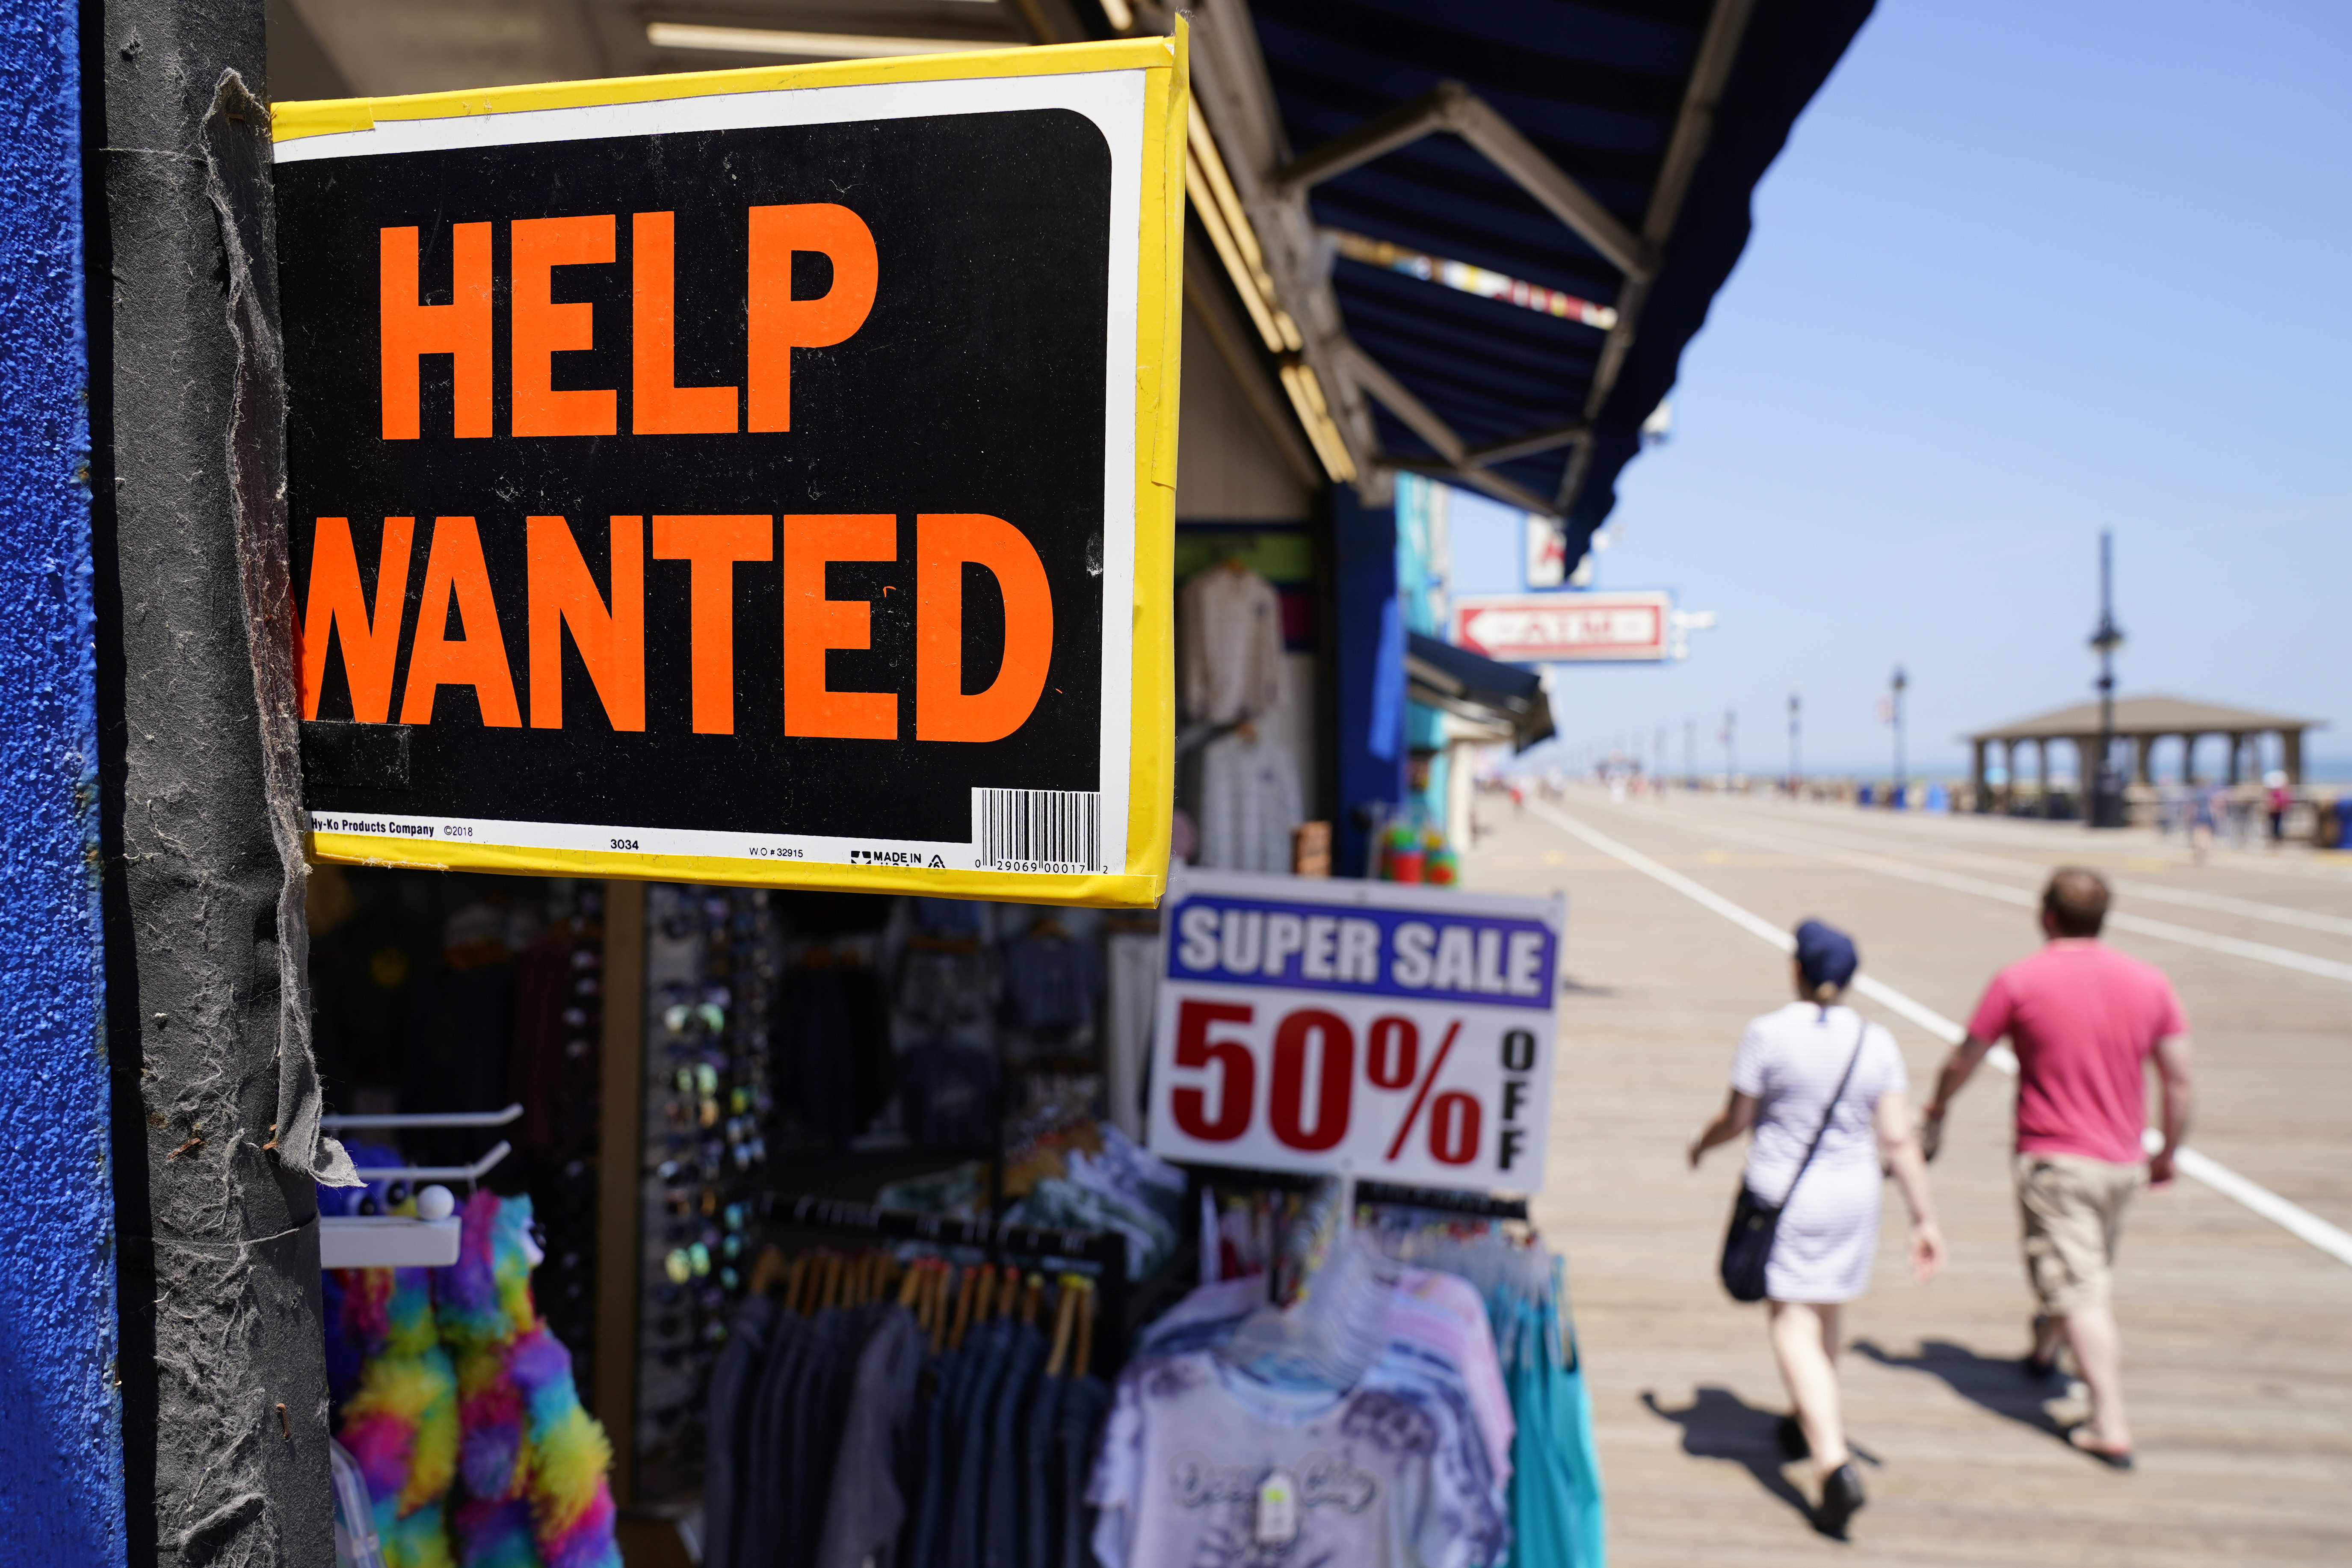 People walk past a help wanted sign in front of a souvenir shop along the boardwalk.